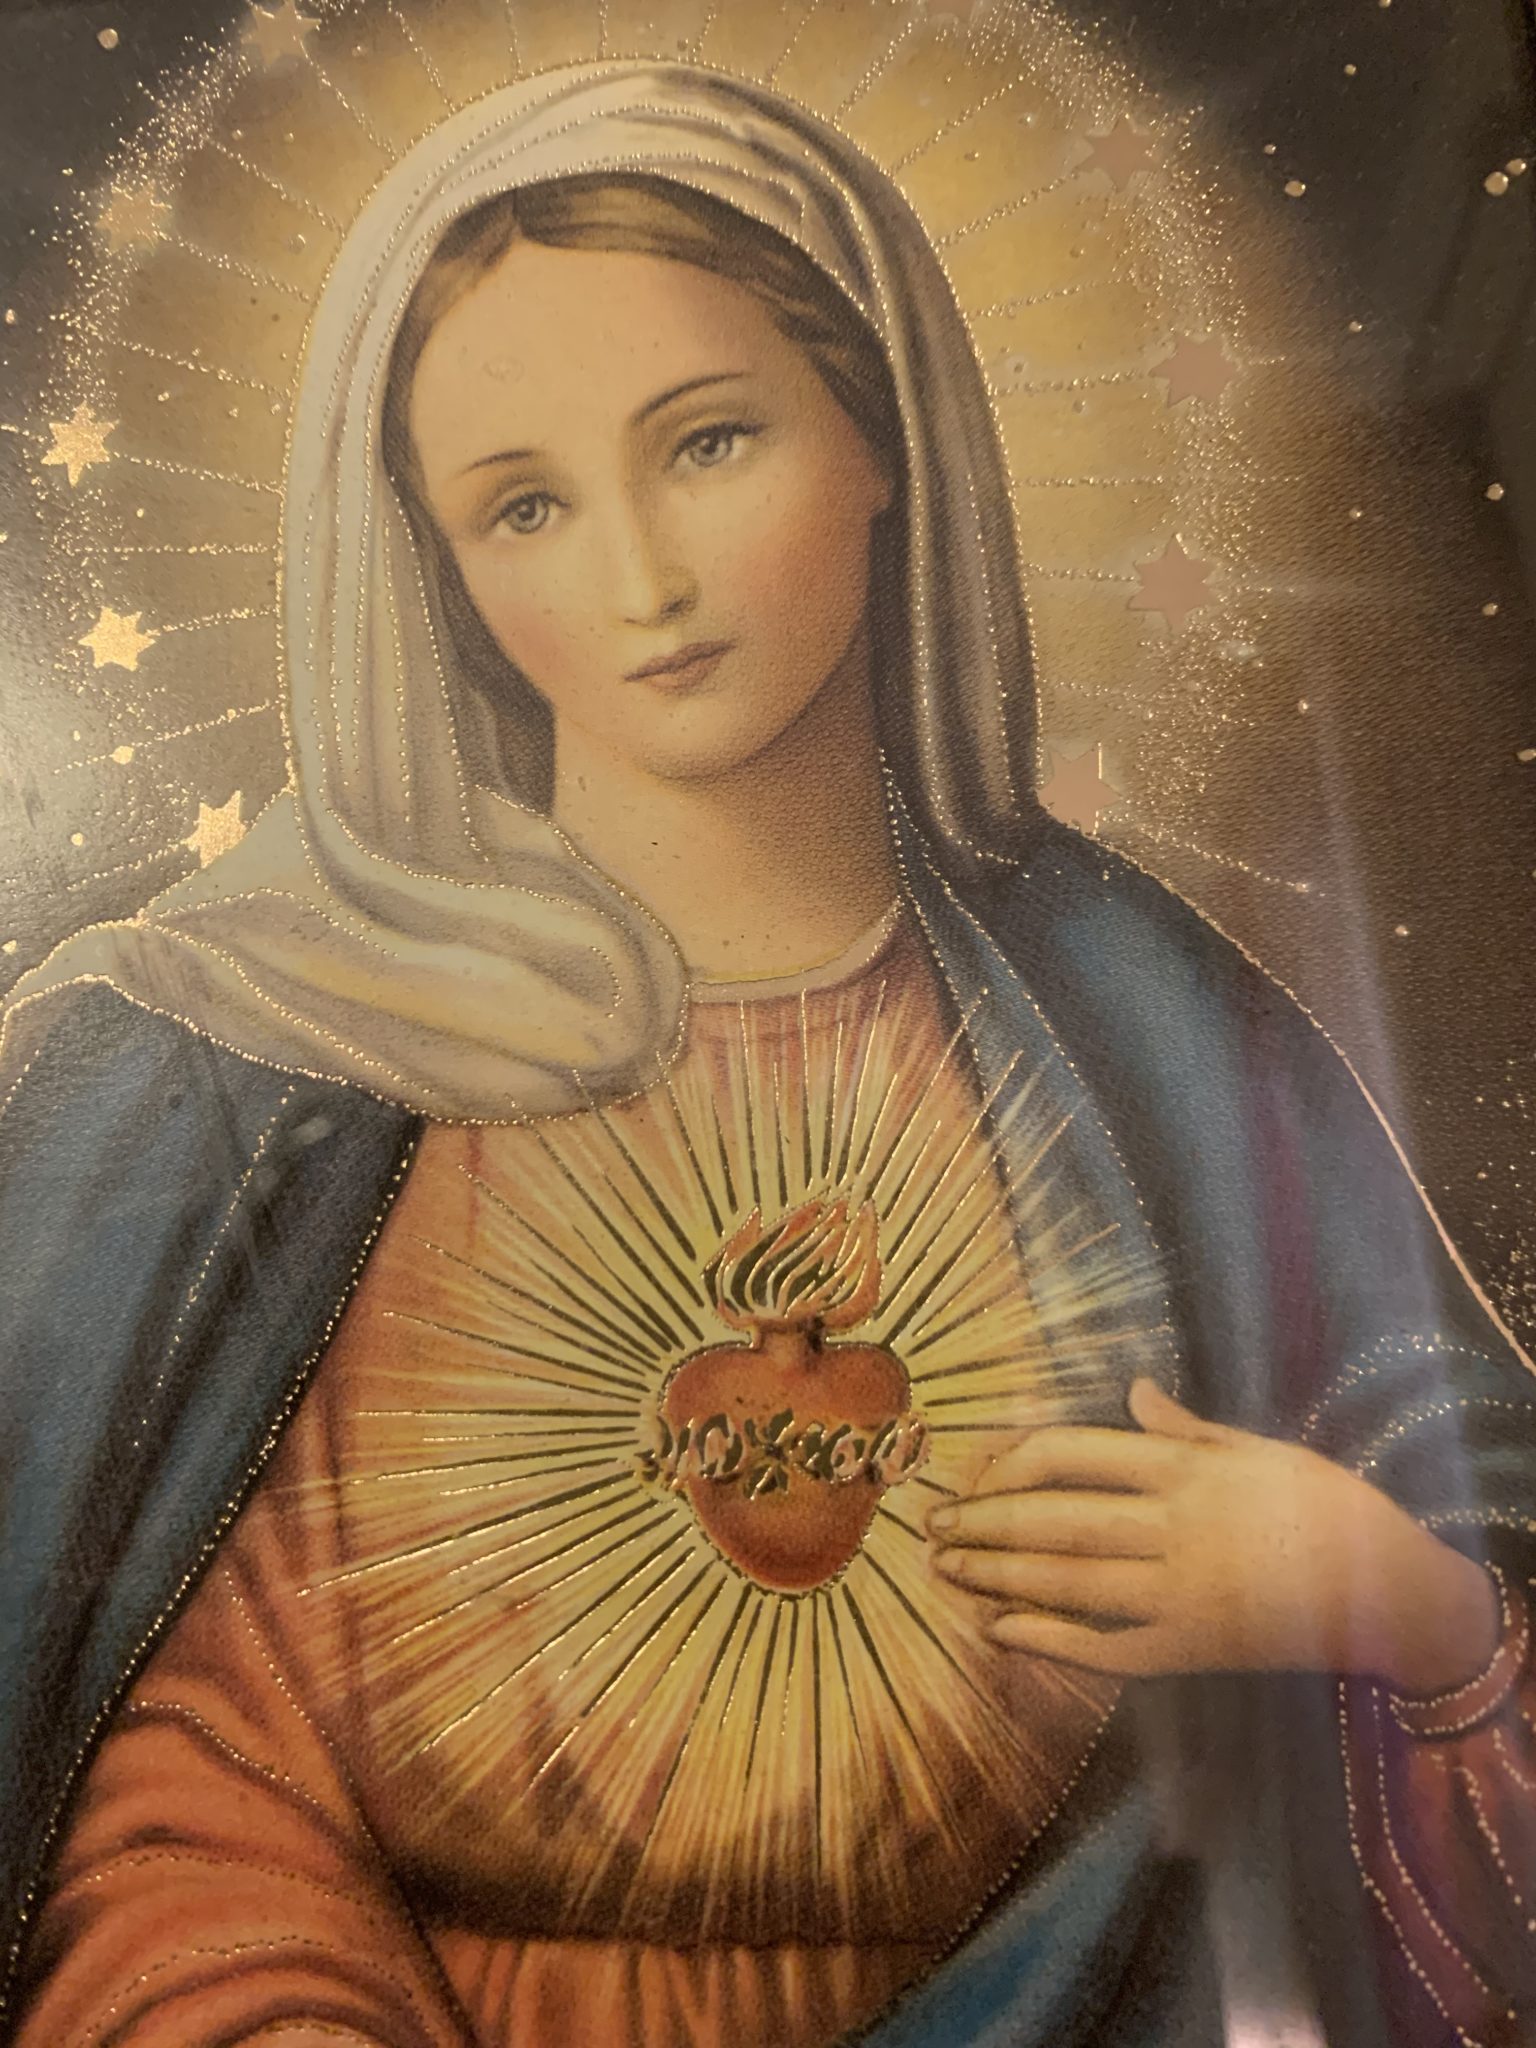 FEAST OF THE IMMACULATE HEART OF MARY Luisa Piccarreta